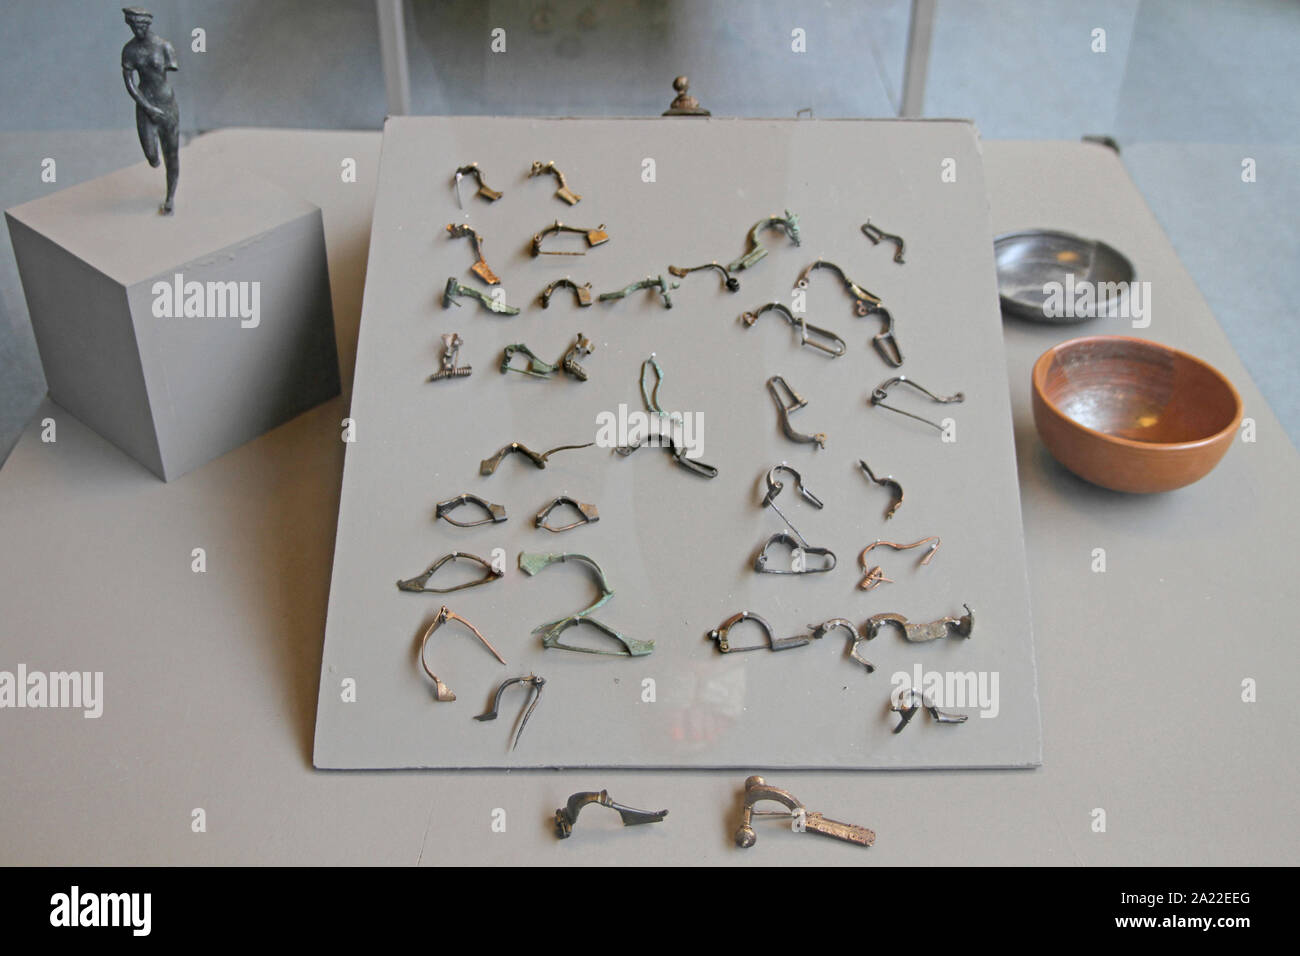 Collection of earrings, chain clips, two bowls and figurine displayed in glass casing, National Archaeological Museum Djerdap, Kladovo, Serbia. Stock Photo